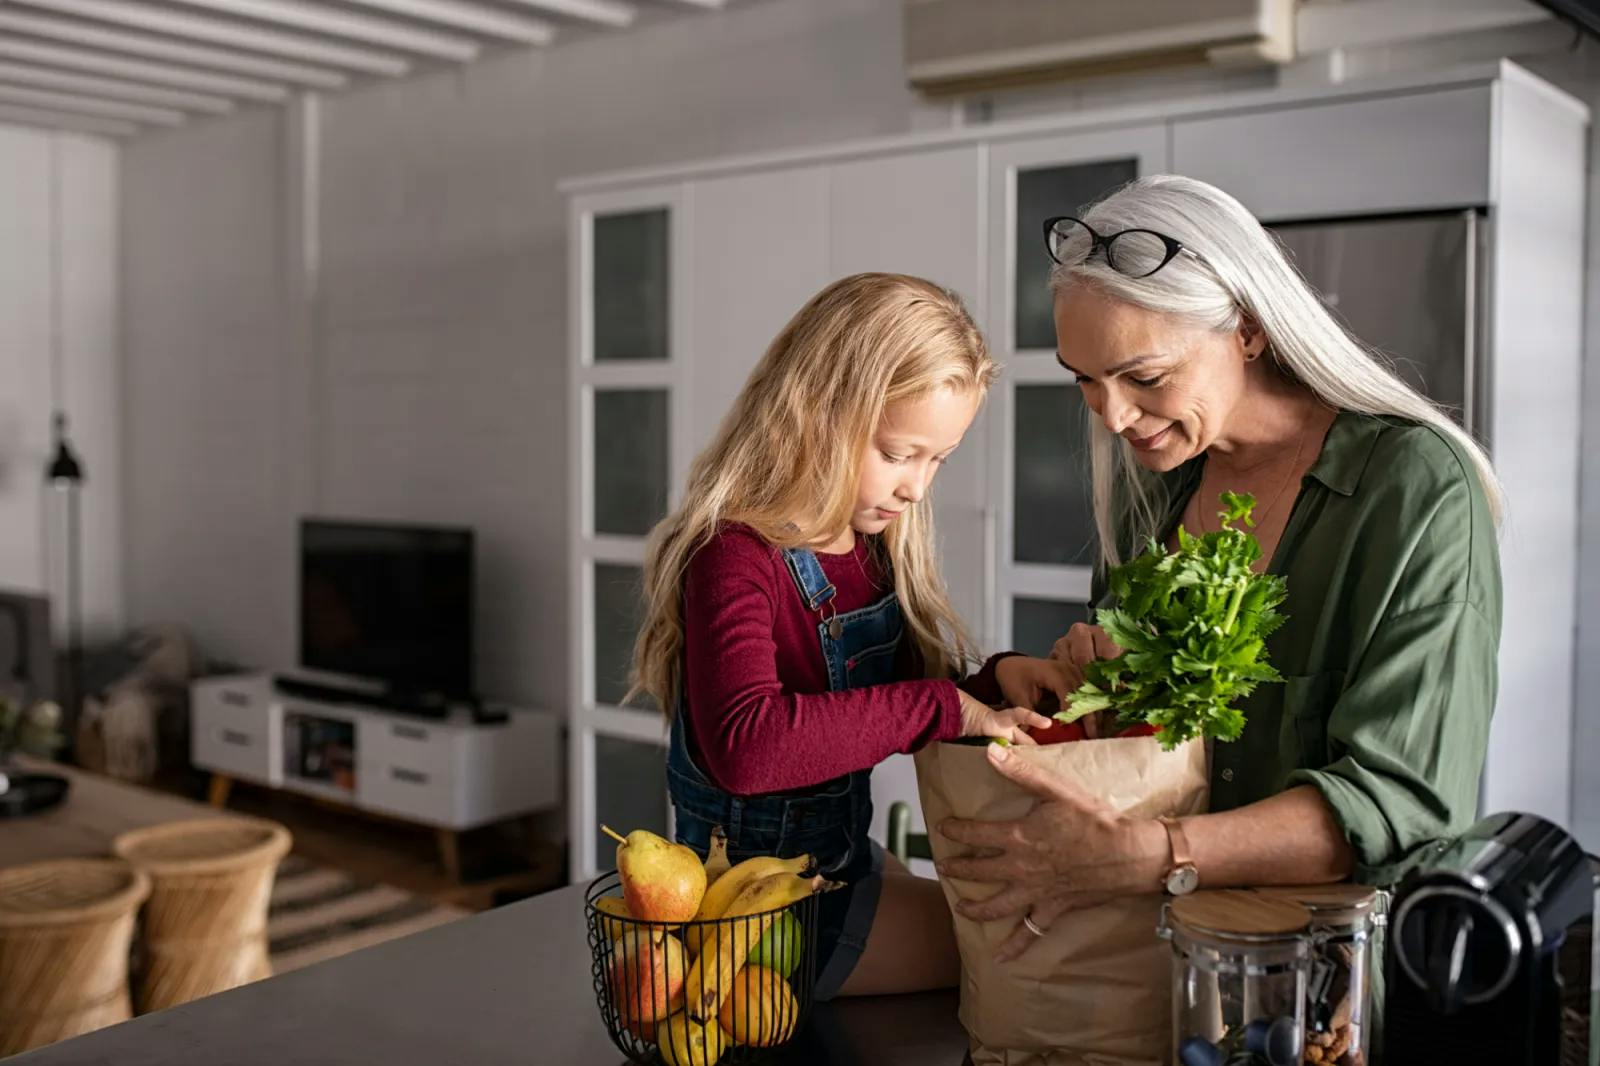 Grandmother and granddaughter unpacking groceries in the kitchen